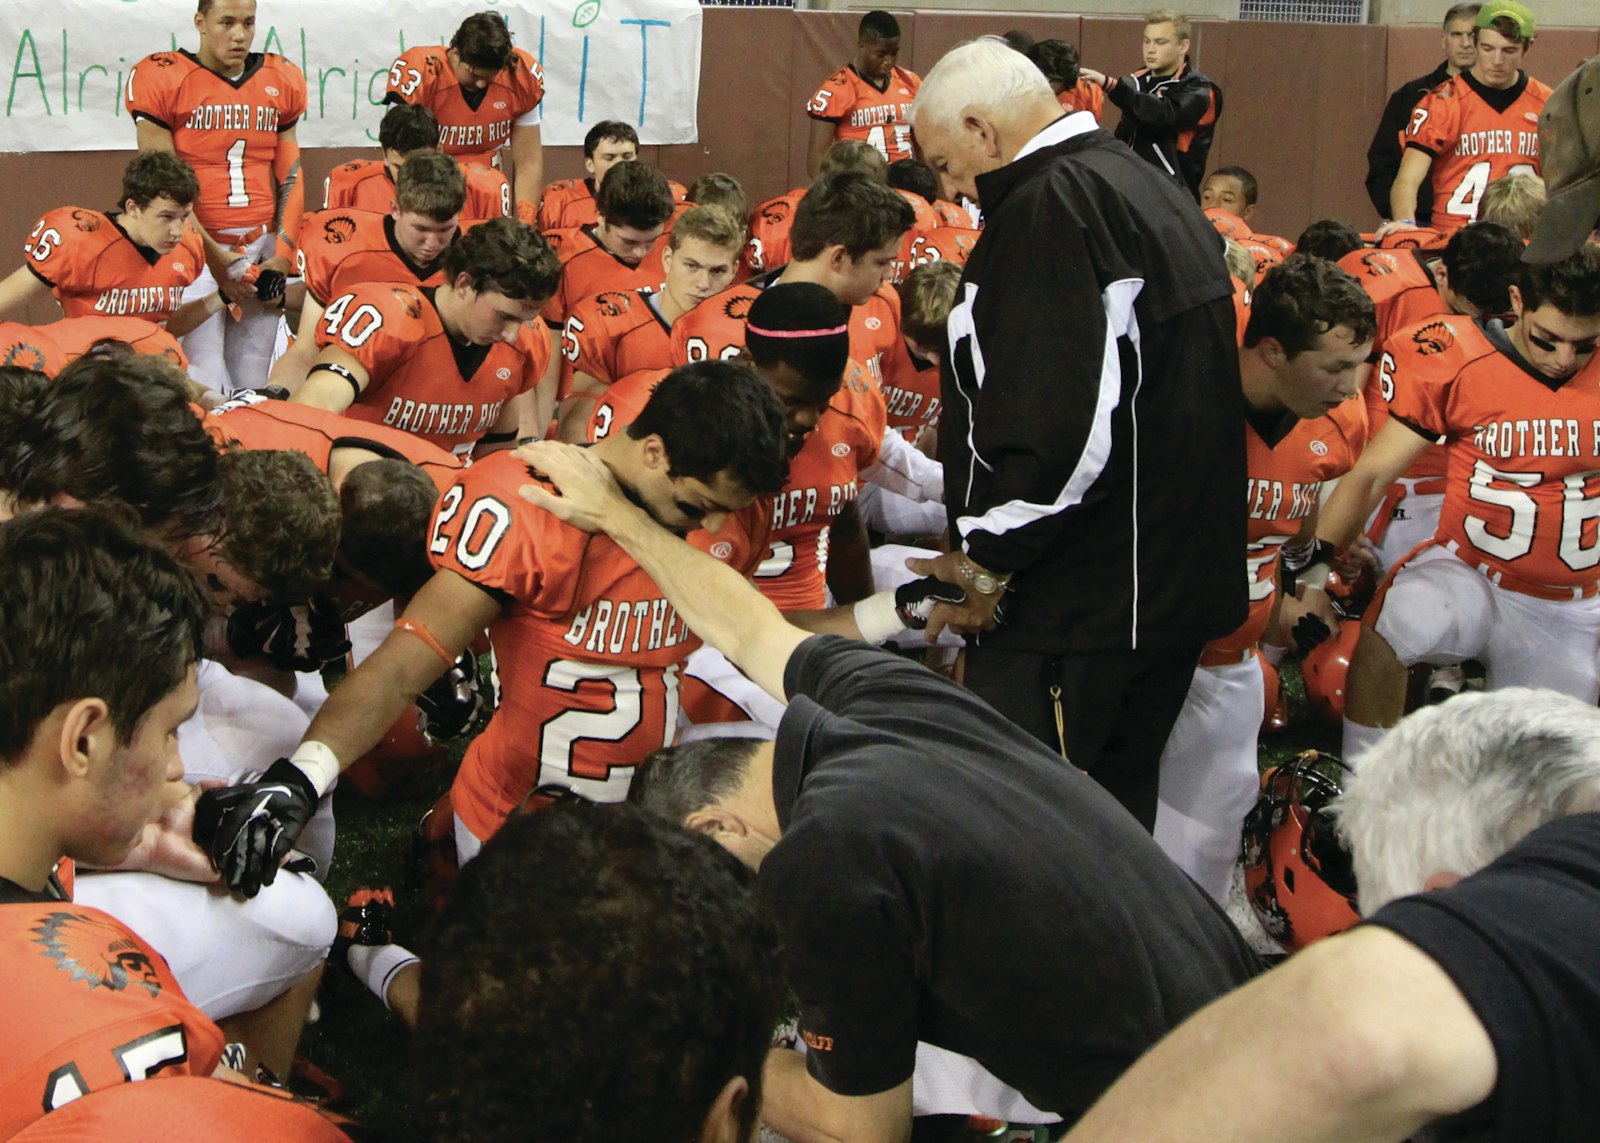 Al Fracassa prays with his Brother Rice football team in the locker room prior to a game. (Photo courtesy of Ken Cendrowski)